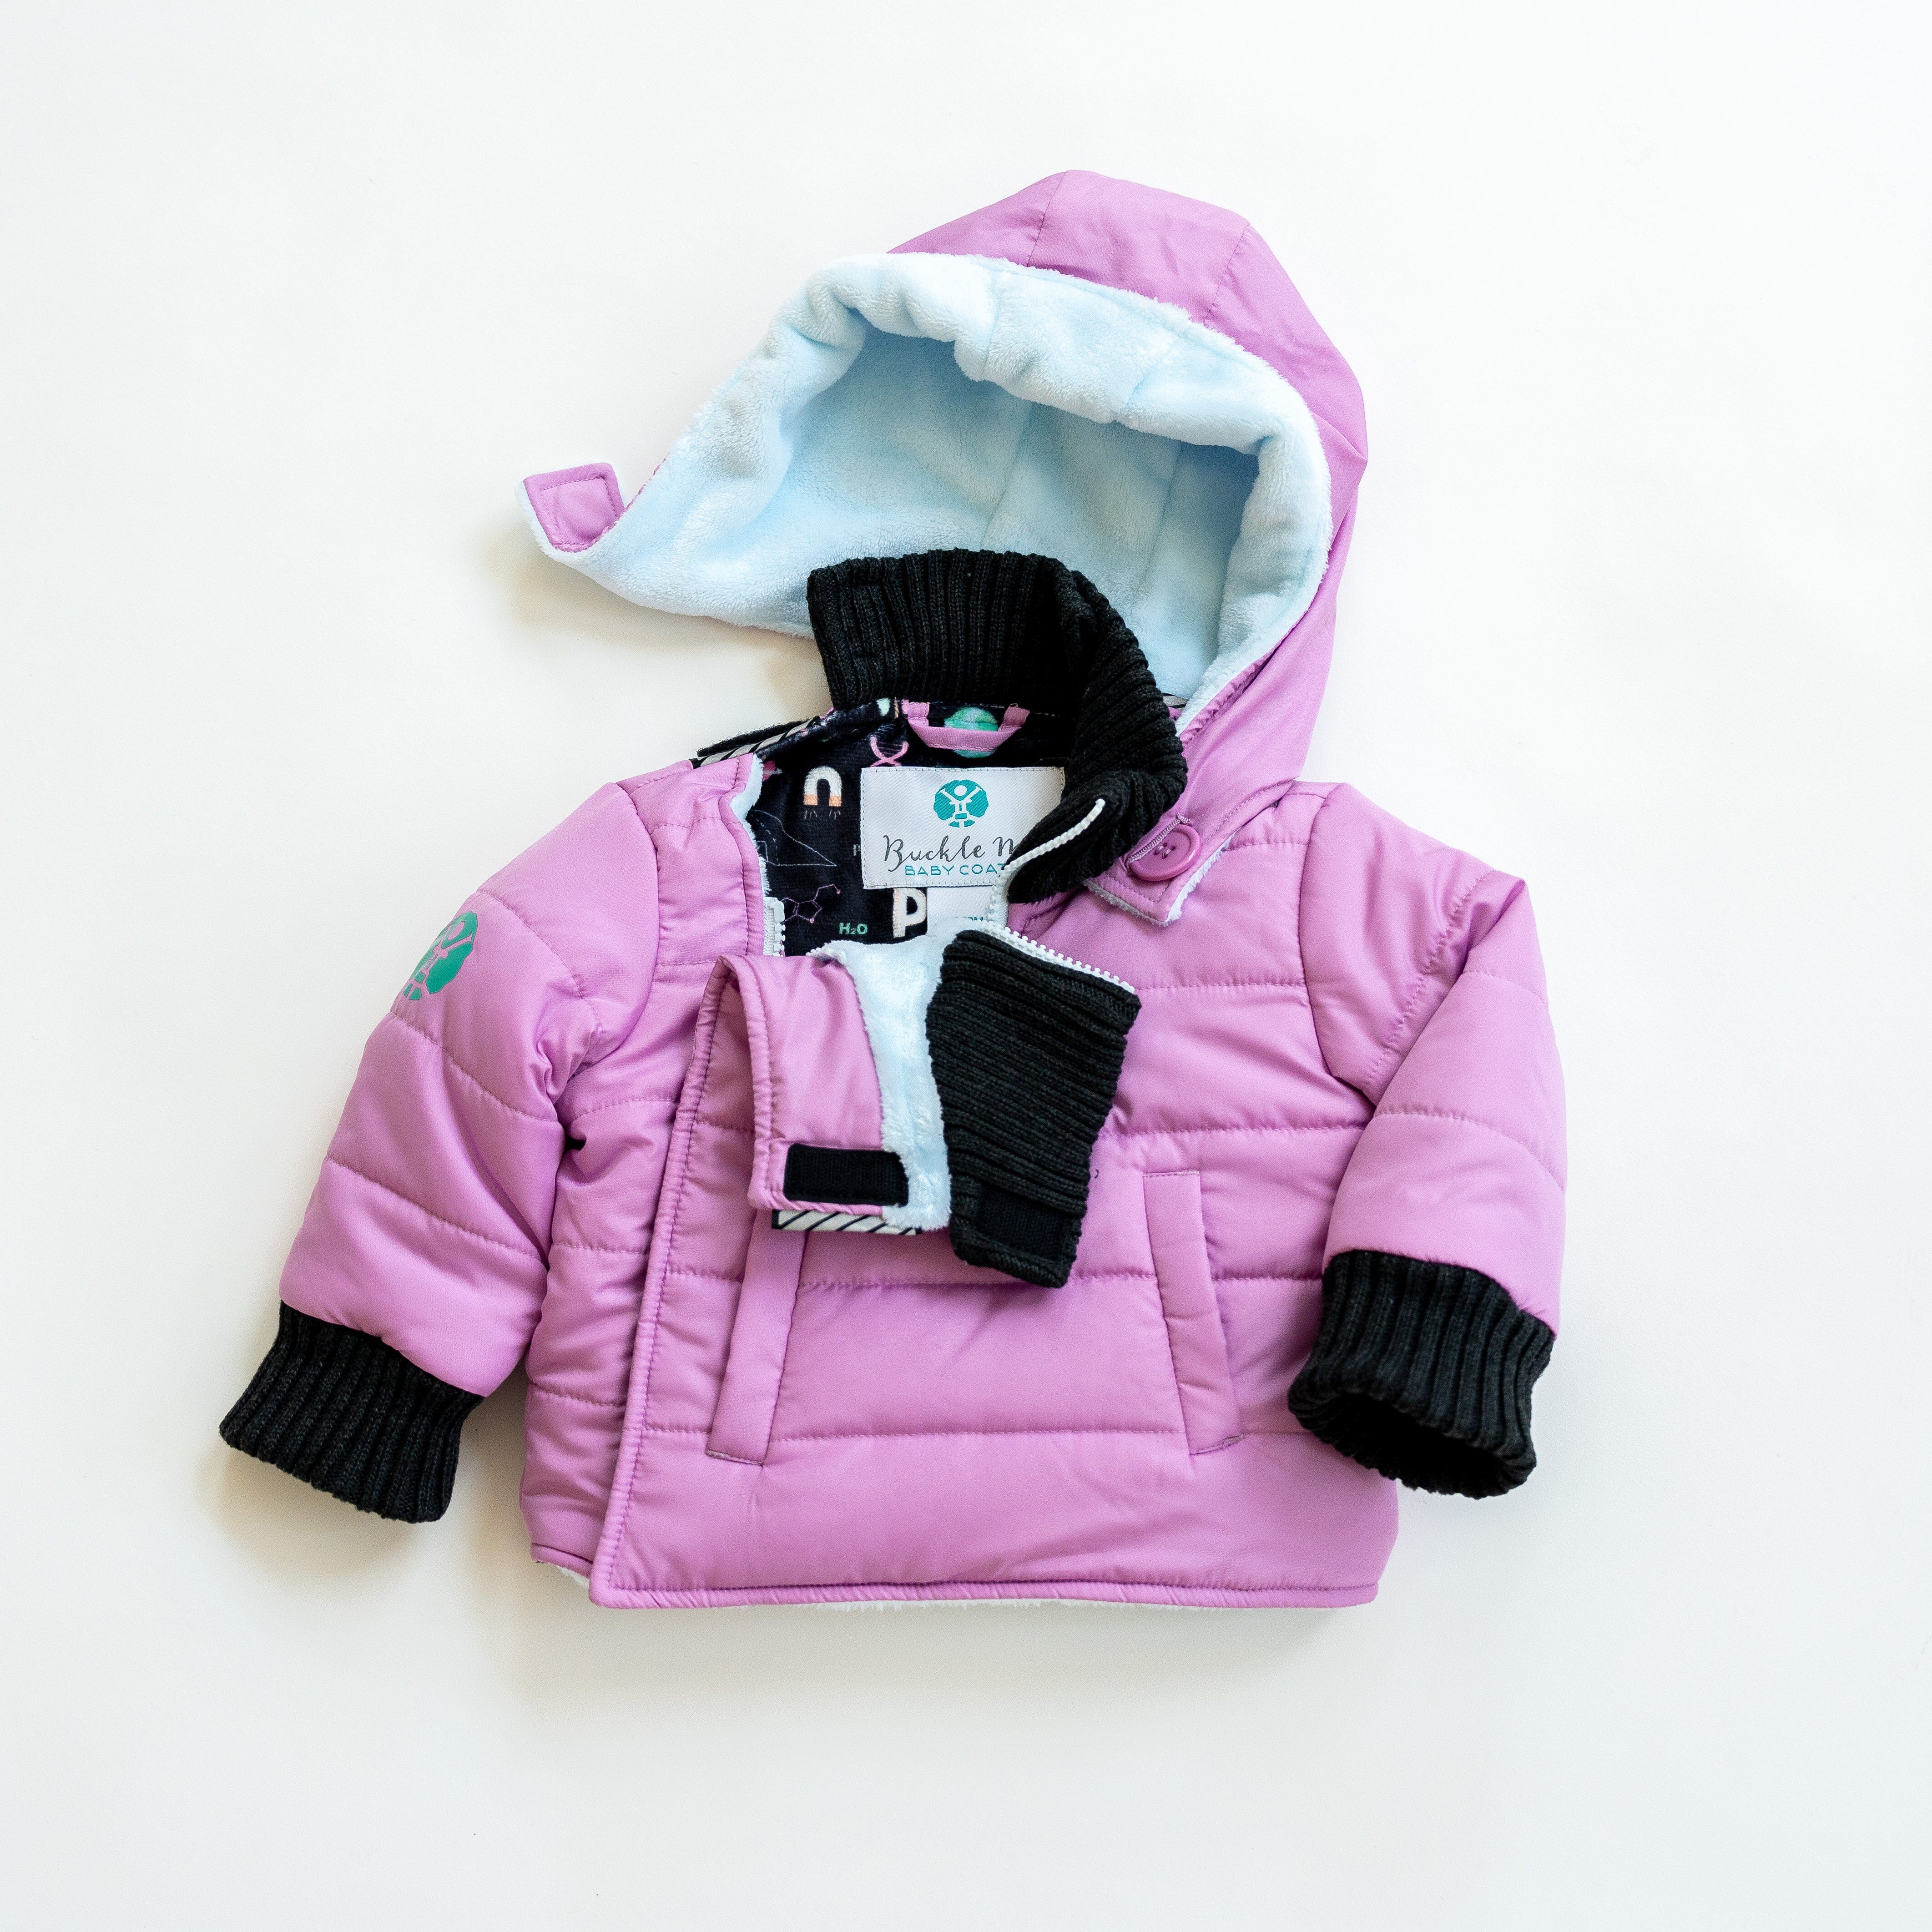 Buckle Me Baby Coats - Car seat friendly coat go at home and stay